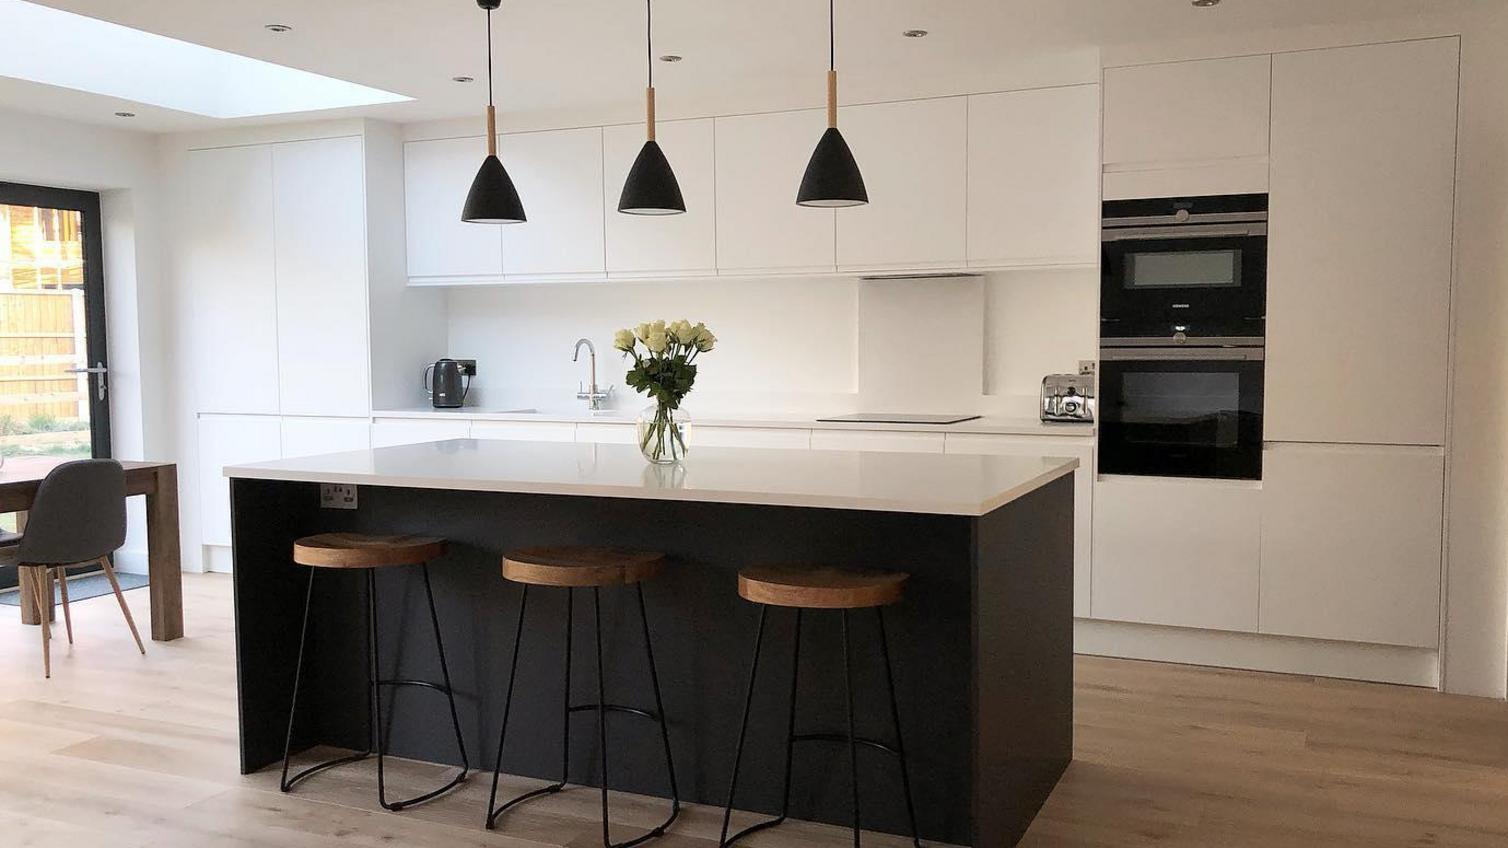 Two-tone black kitchen idea using matt white and black integrated handle doors. Has a dark island and an open plan layout.